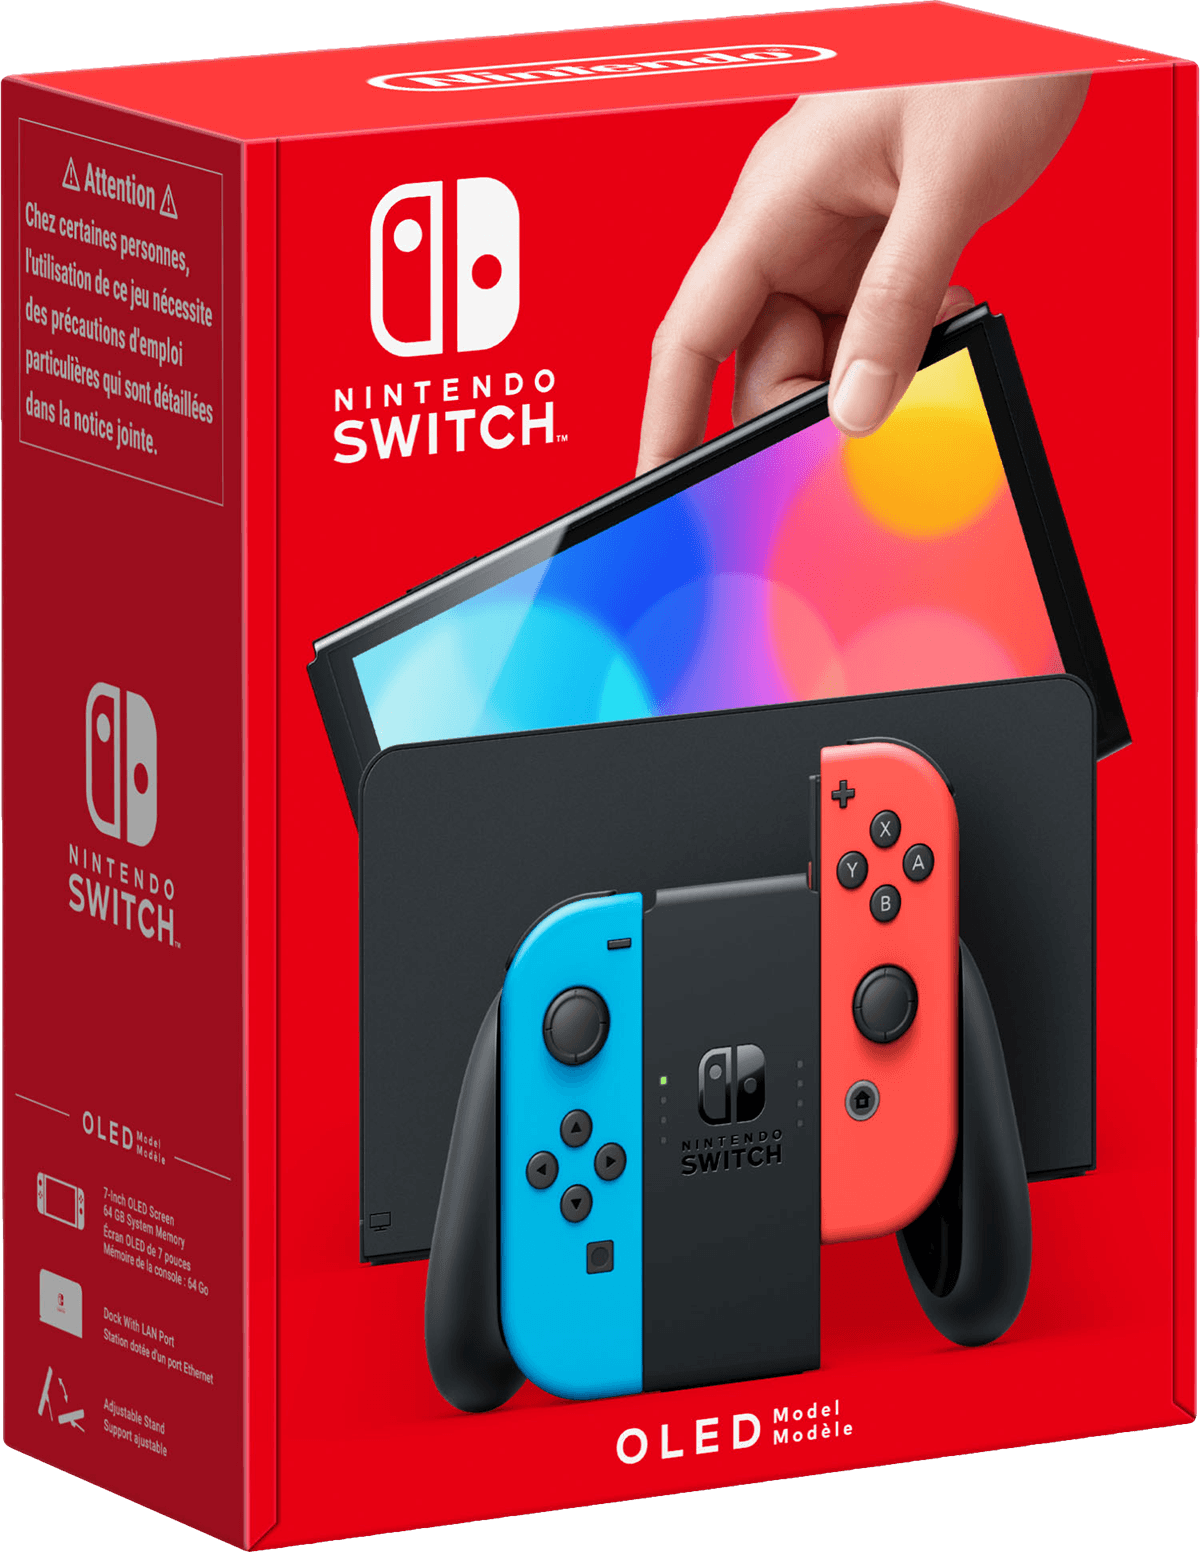 Nintendo Switch 64GB OLED Model Console - Neon Red / Neon Blue (NS / Switch)